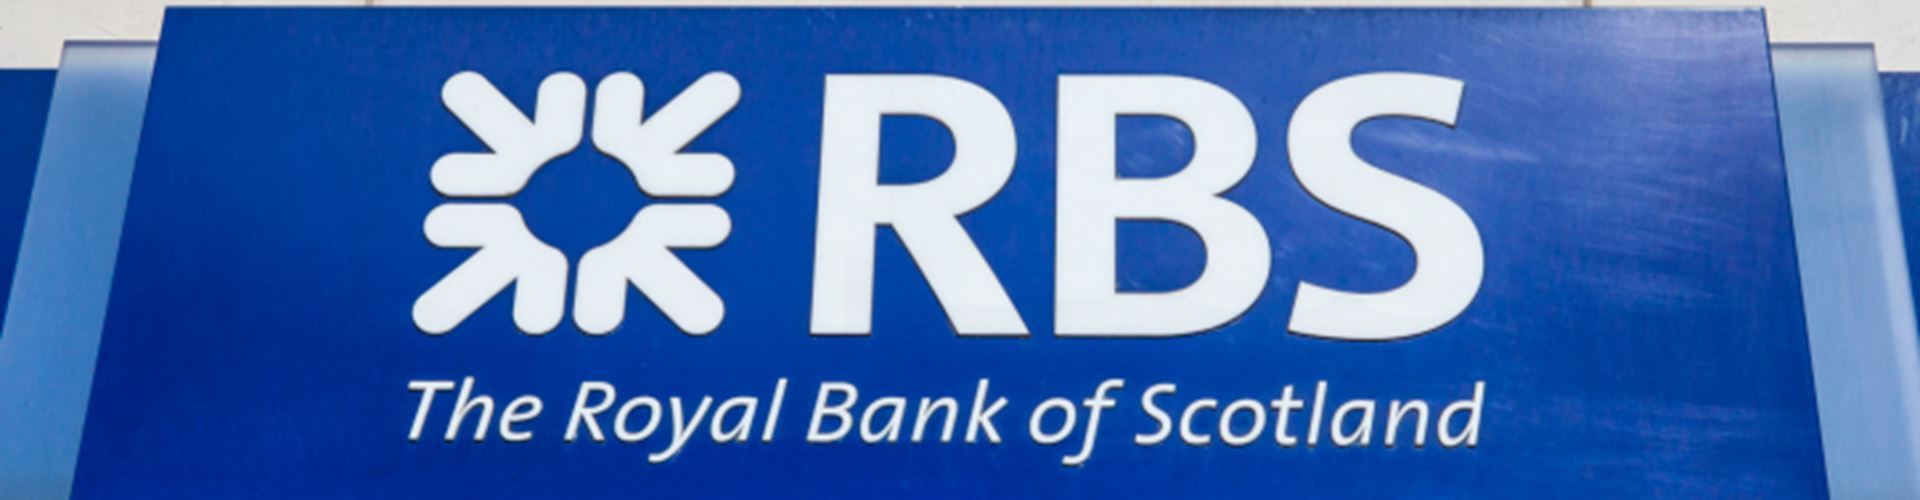 Hedge funds receive £10m windfall from RBS share sale